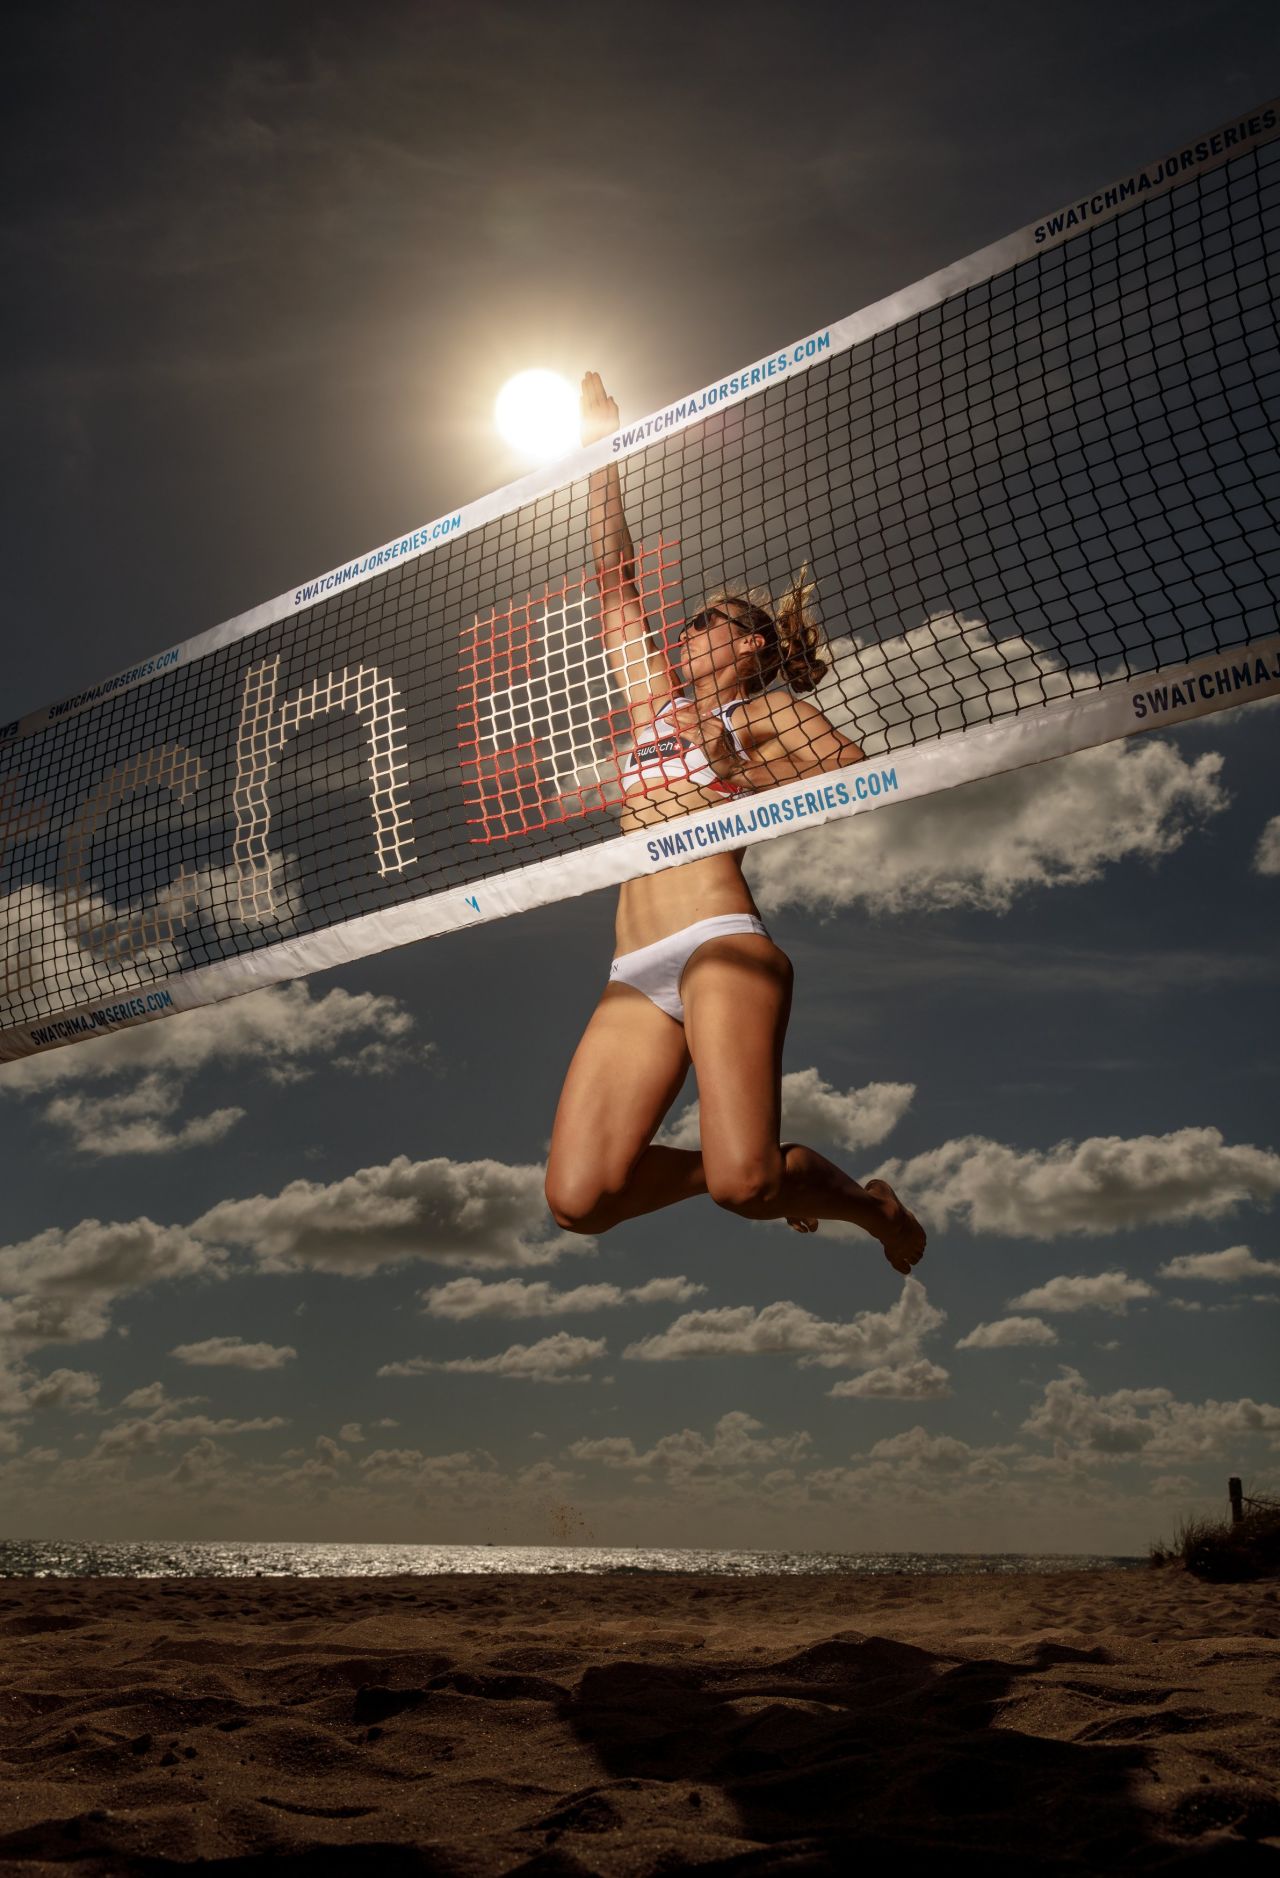 The Beach Volleyball World Tour takes in 26 sites across 20 countries. The highlights include the five Major Series events -- of which Fort Lauderdale is one -- and the World Tour finals which conclude the season in August. Locations range from Rio to Rome, The Hague to Hamburg. 